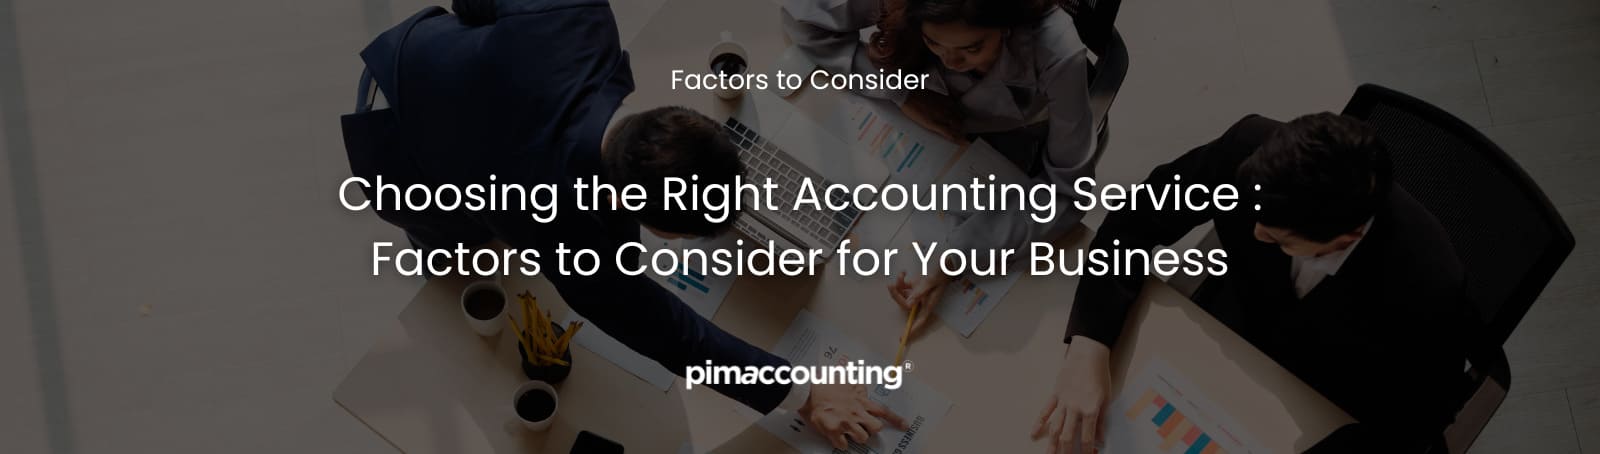 Choosing the Right Accounting Service: Factors to Consider for Your Business